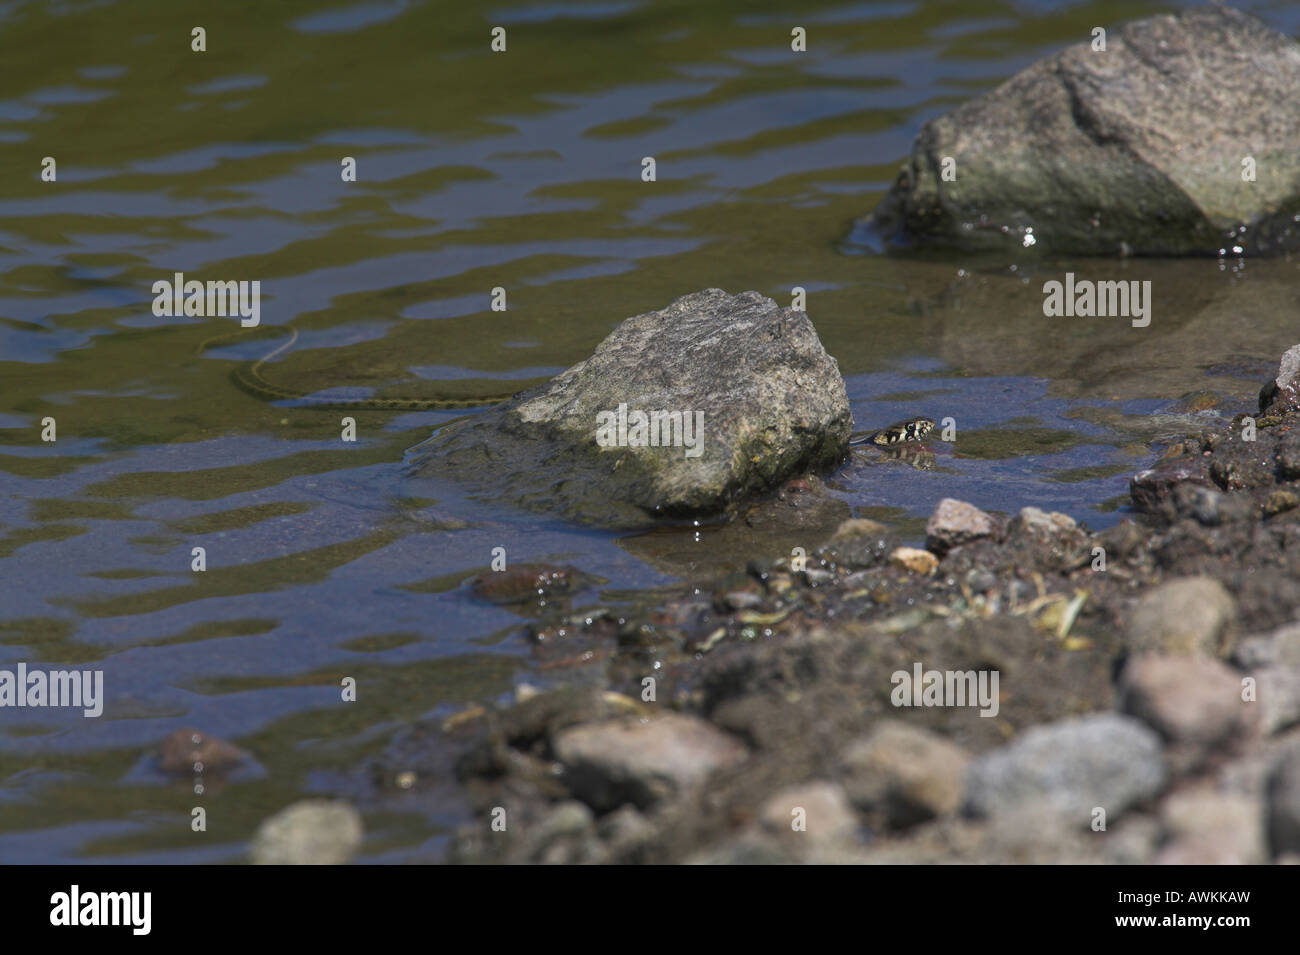 Dice Snake Natrix tessellata swimming in cattle drinking pool in mountain region of Lesvos, Greece in April. Stock Photo